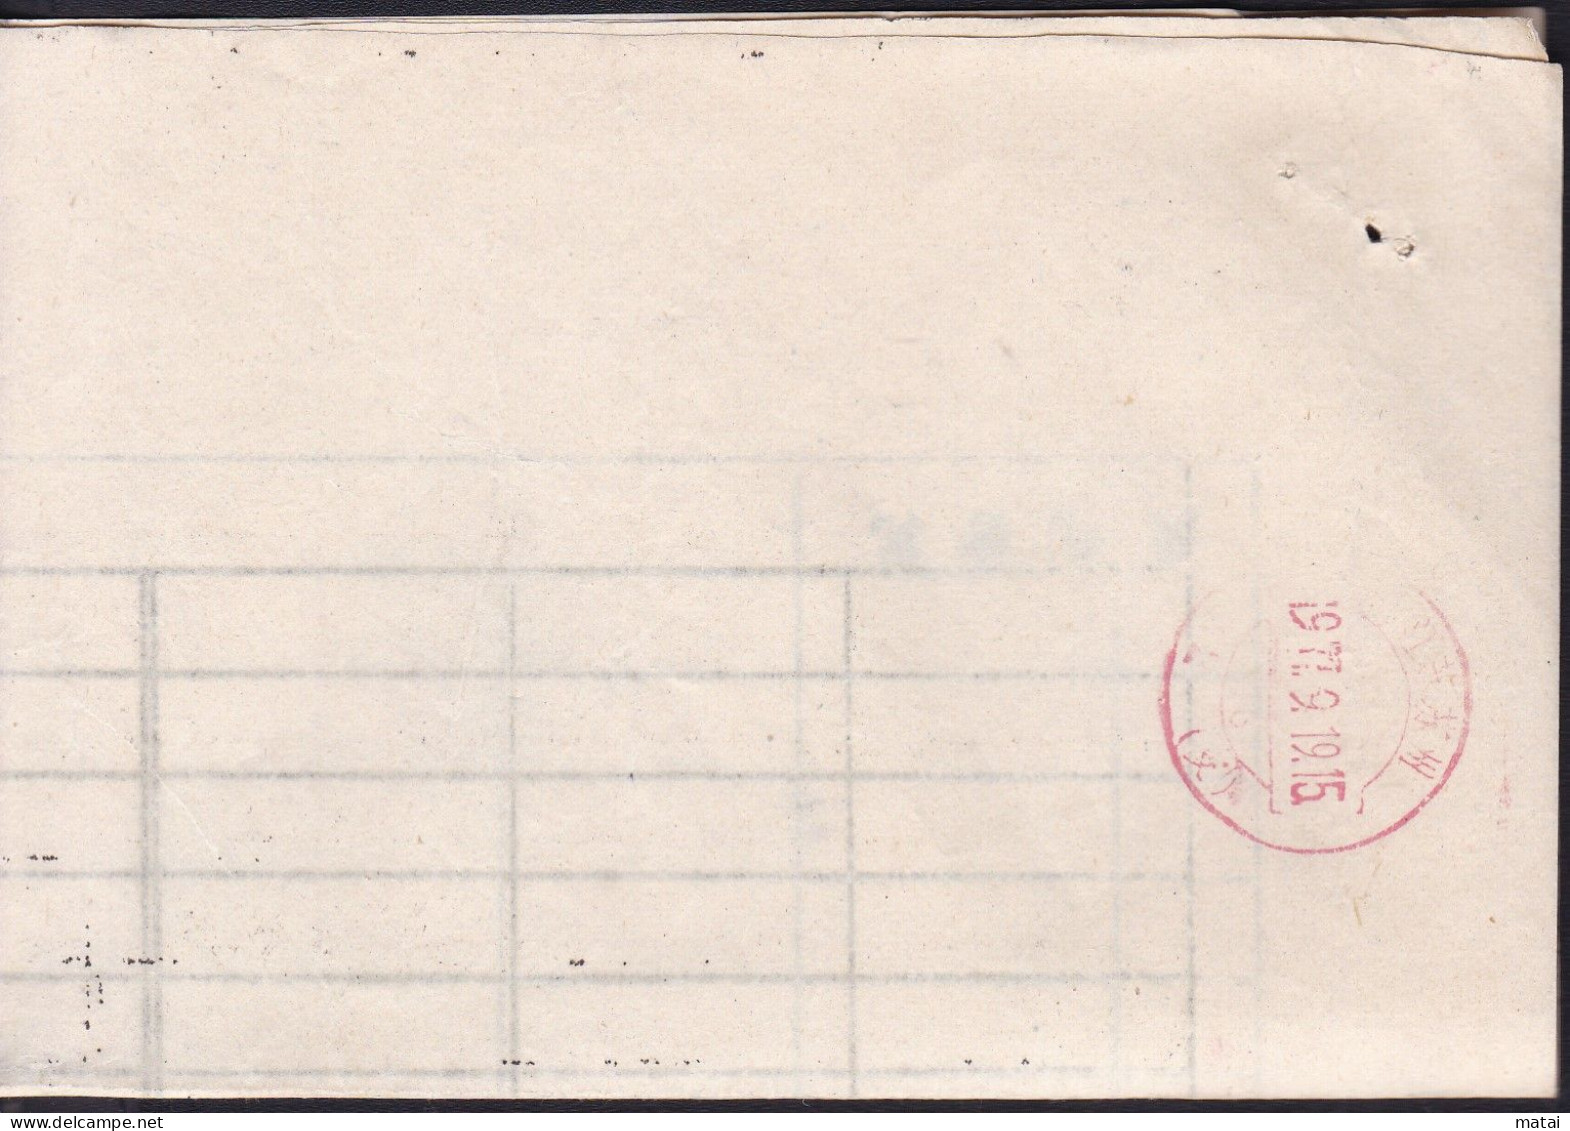 CHINA CHINE 1971 SUZHOU TO SUZHOU Seismological Bureau COVER Observation Records Of Water Wells WITH 1.5 F STAMP - Storia Postale